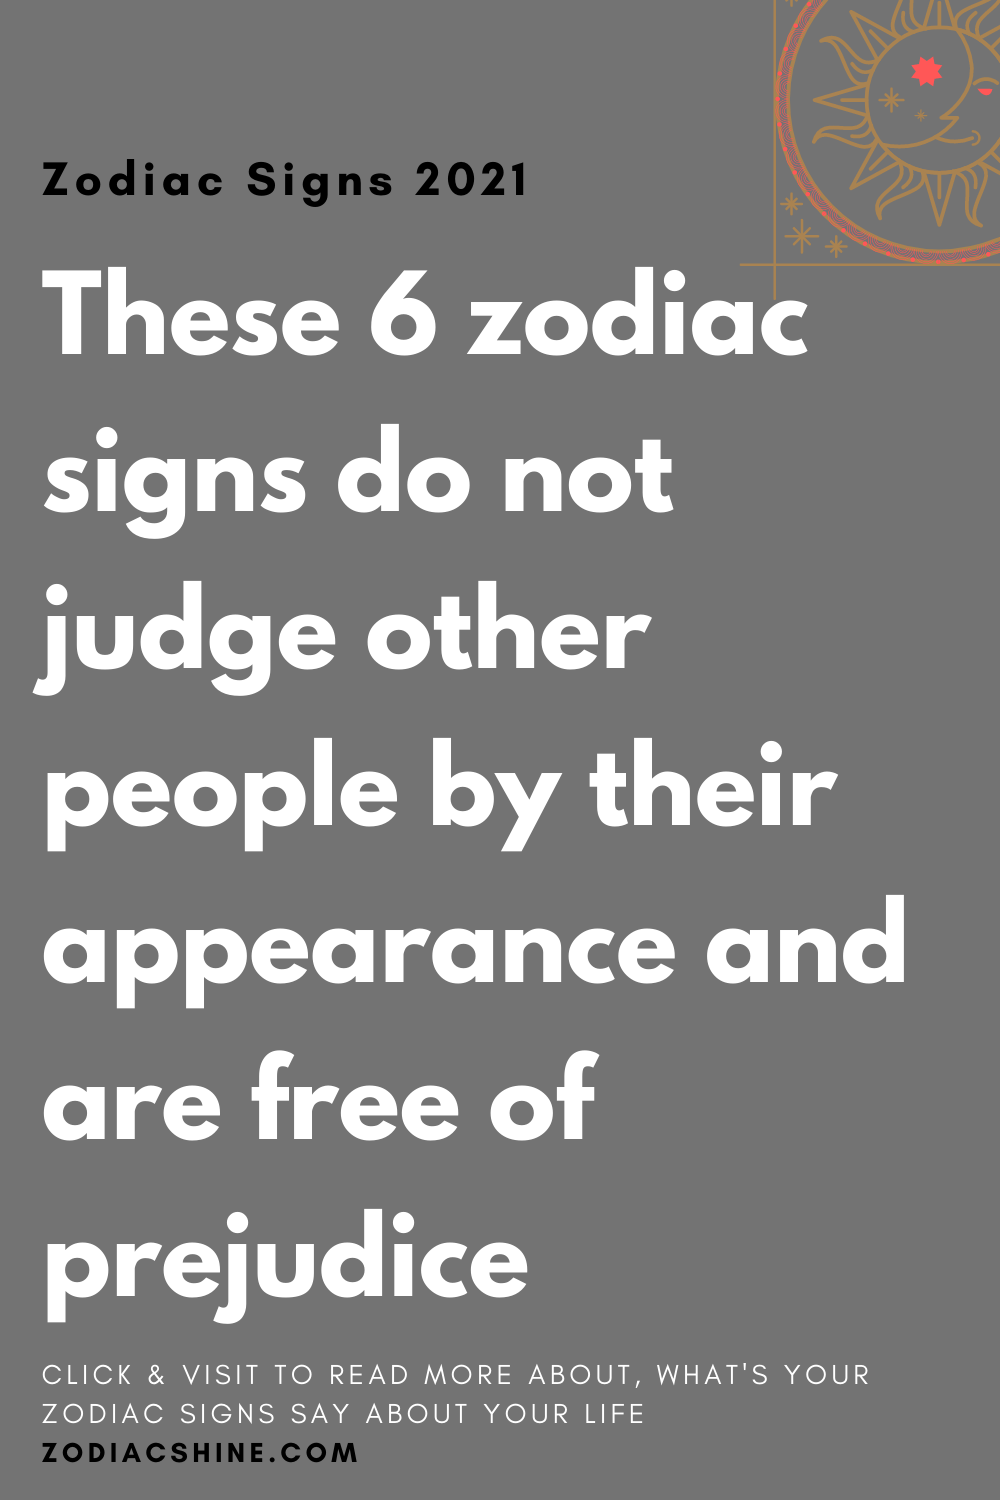 These 6 zodiac signs do not judge other people by their appearance and are free of prejudice